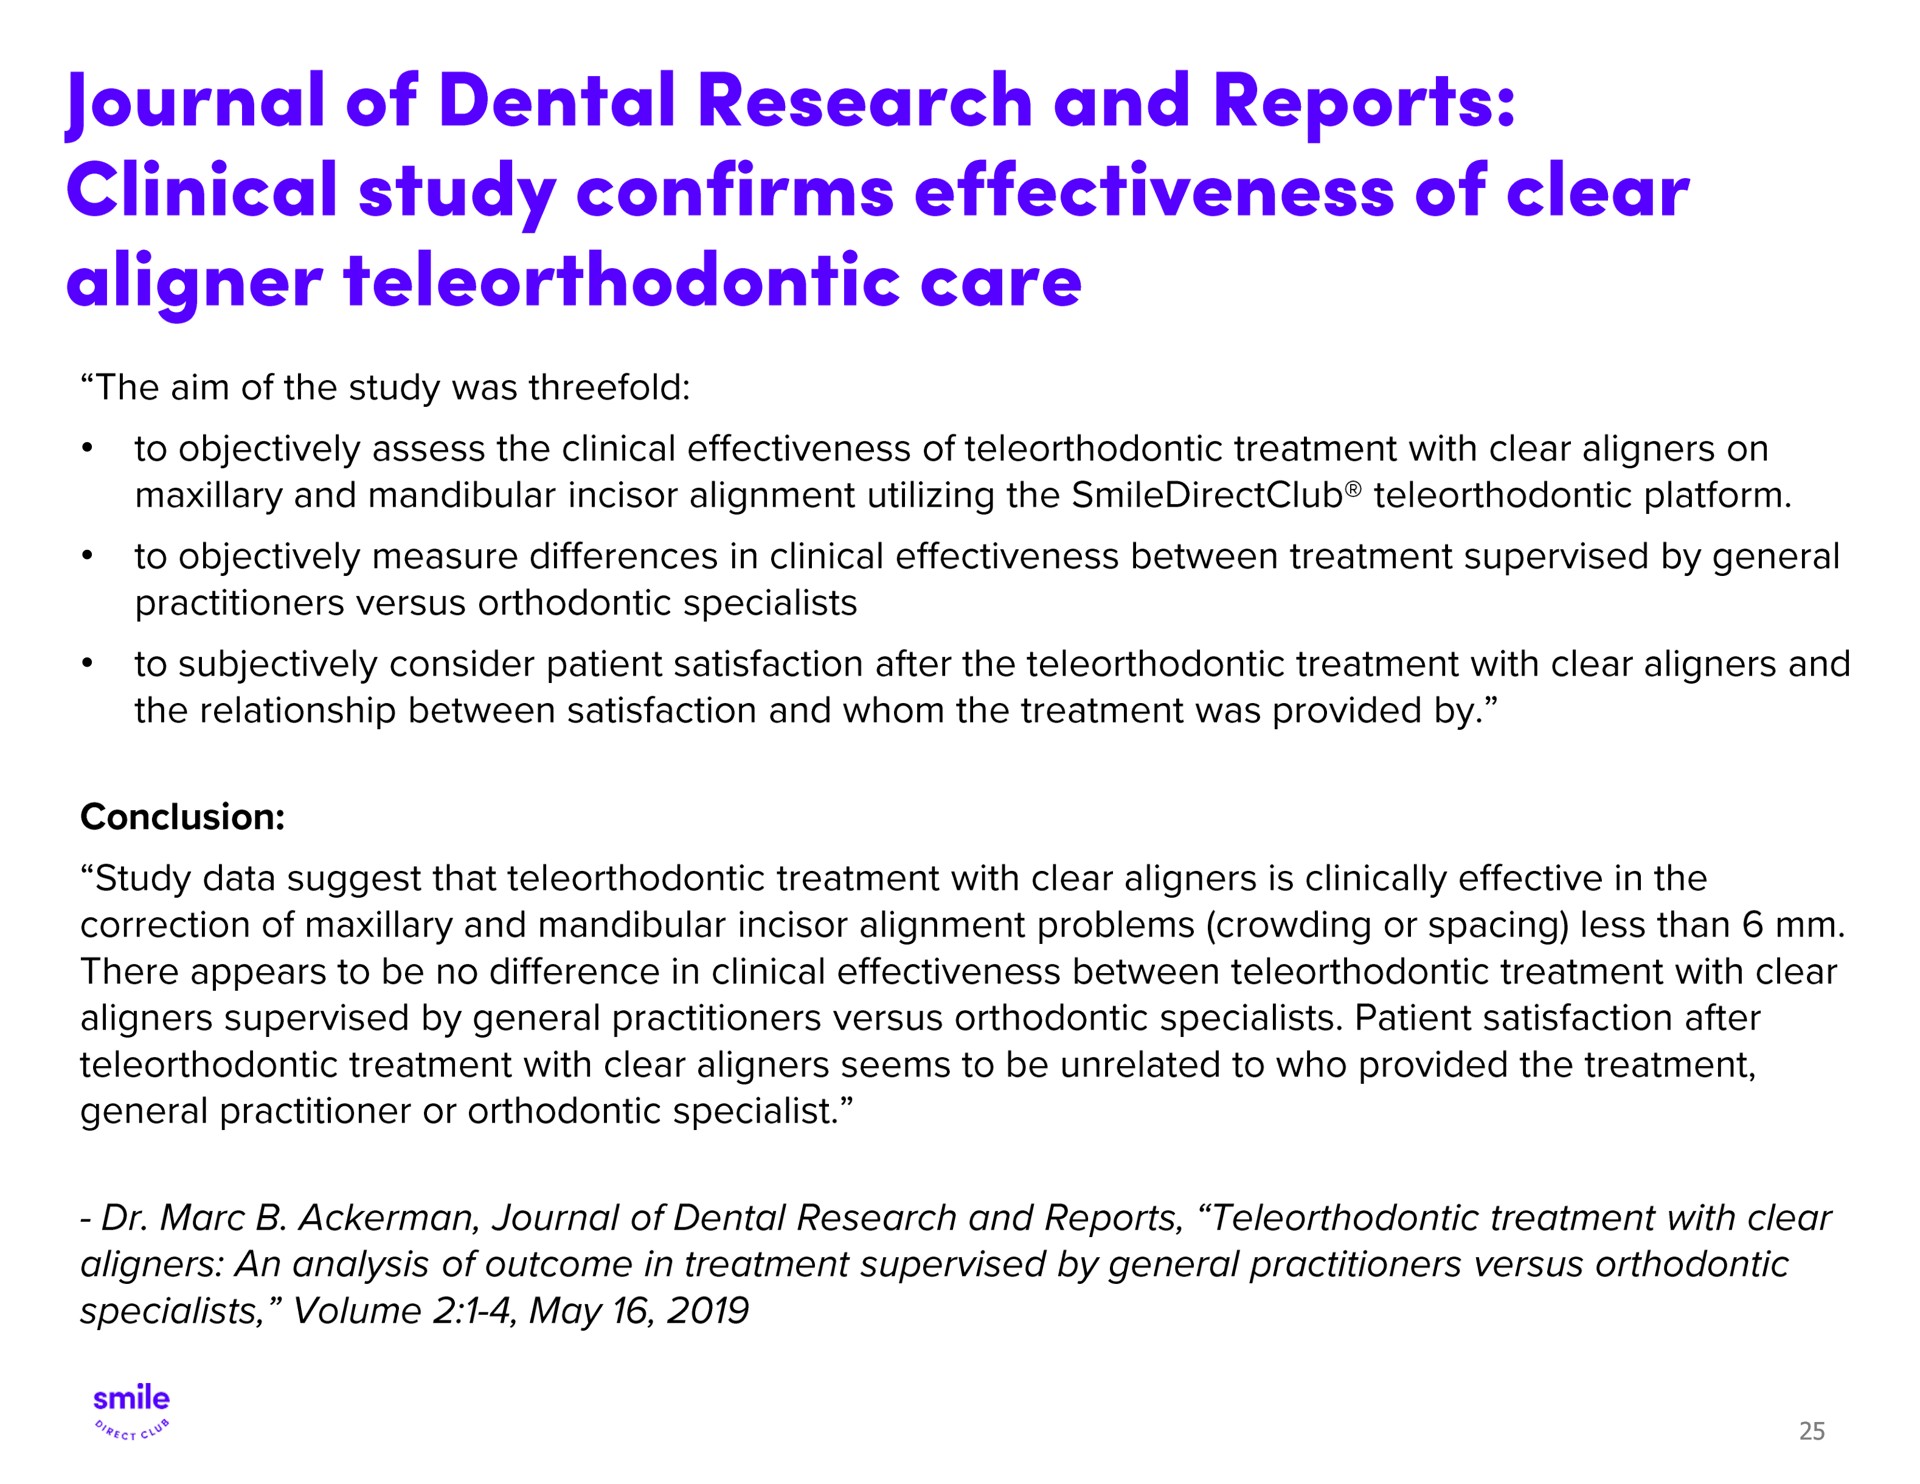 journal of dental research and reports clinical study confirms effectiveness of clear aligner care | SmileDirectClub